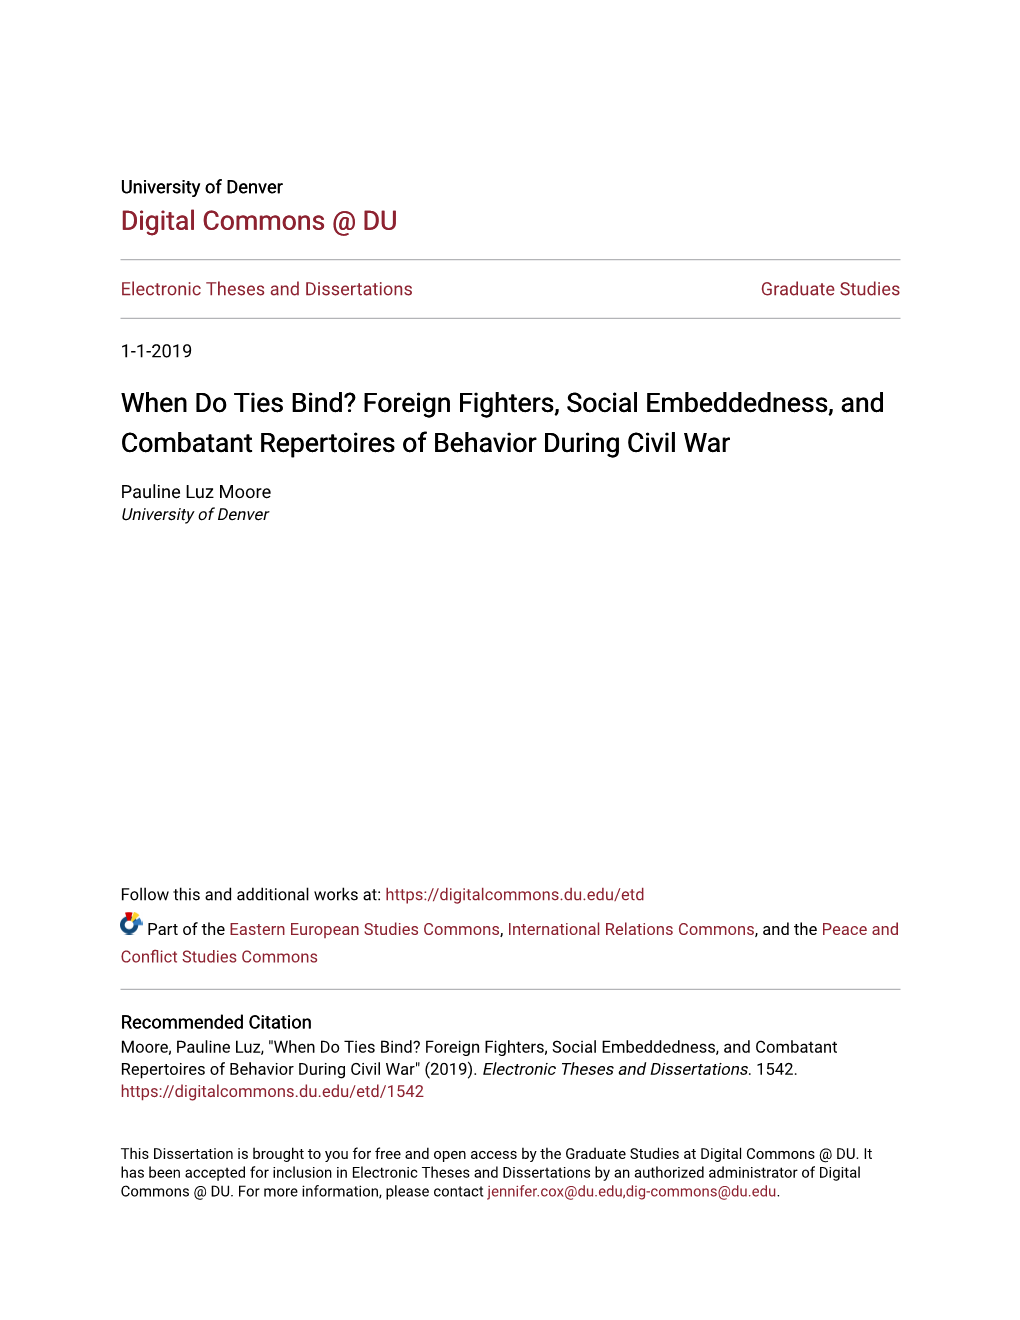 Foreign Fighters, Social Embeddedness, and Combatant Repertoires of Behavior During Civil War